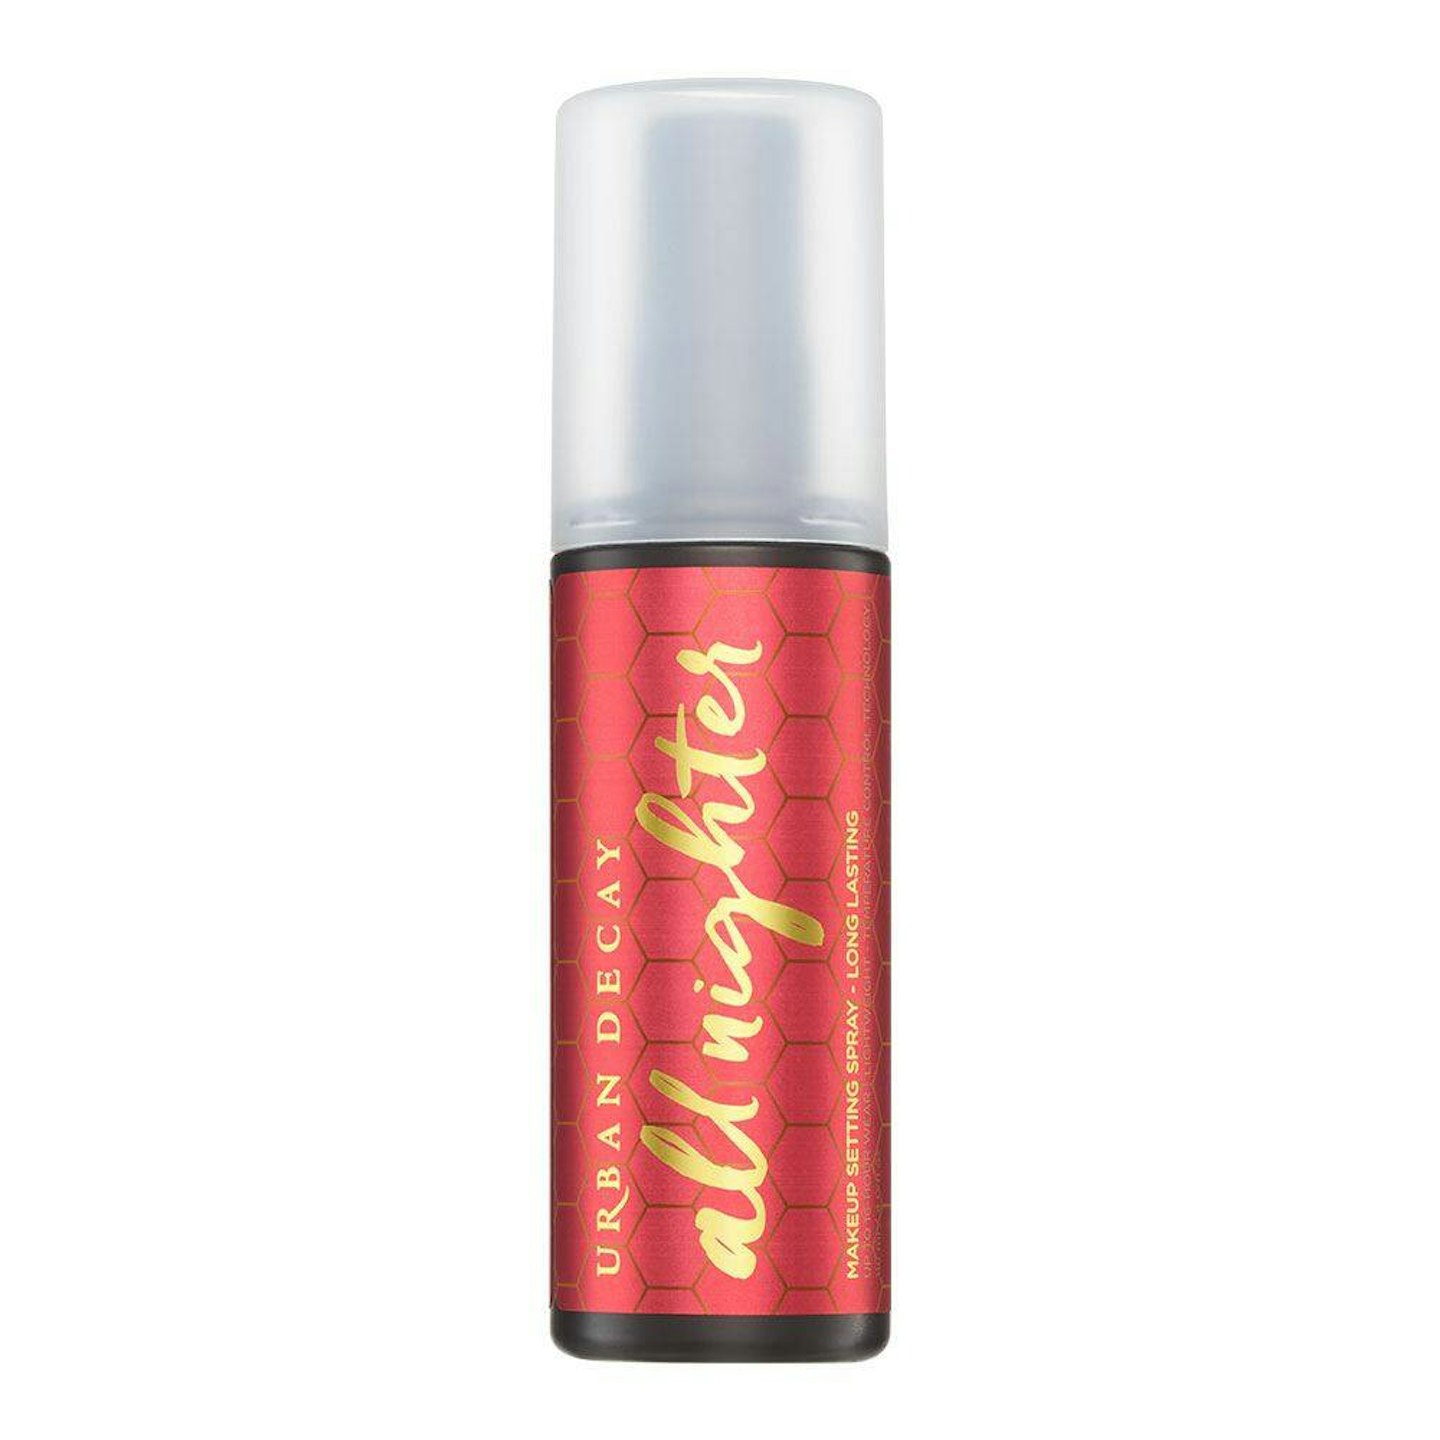 Urban Decay, Chinese New Year All Nighter Spray, £24